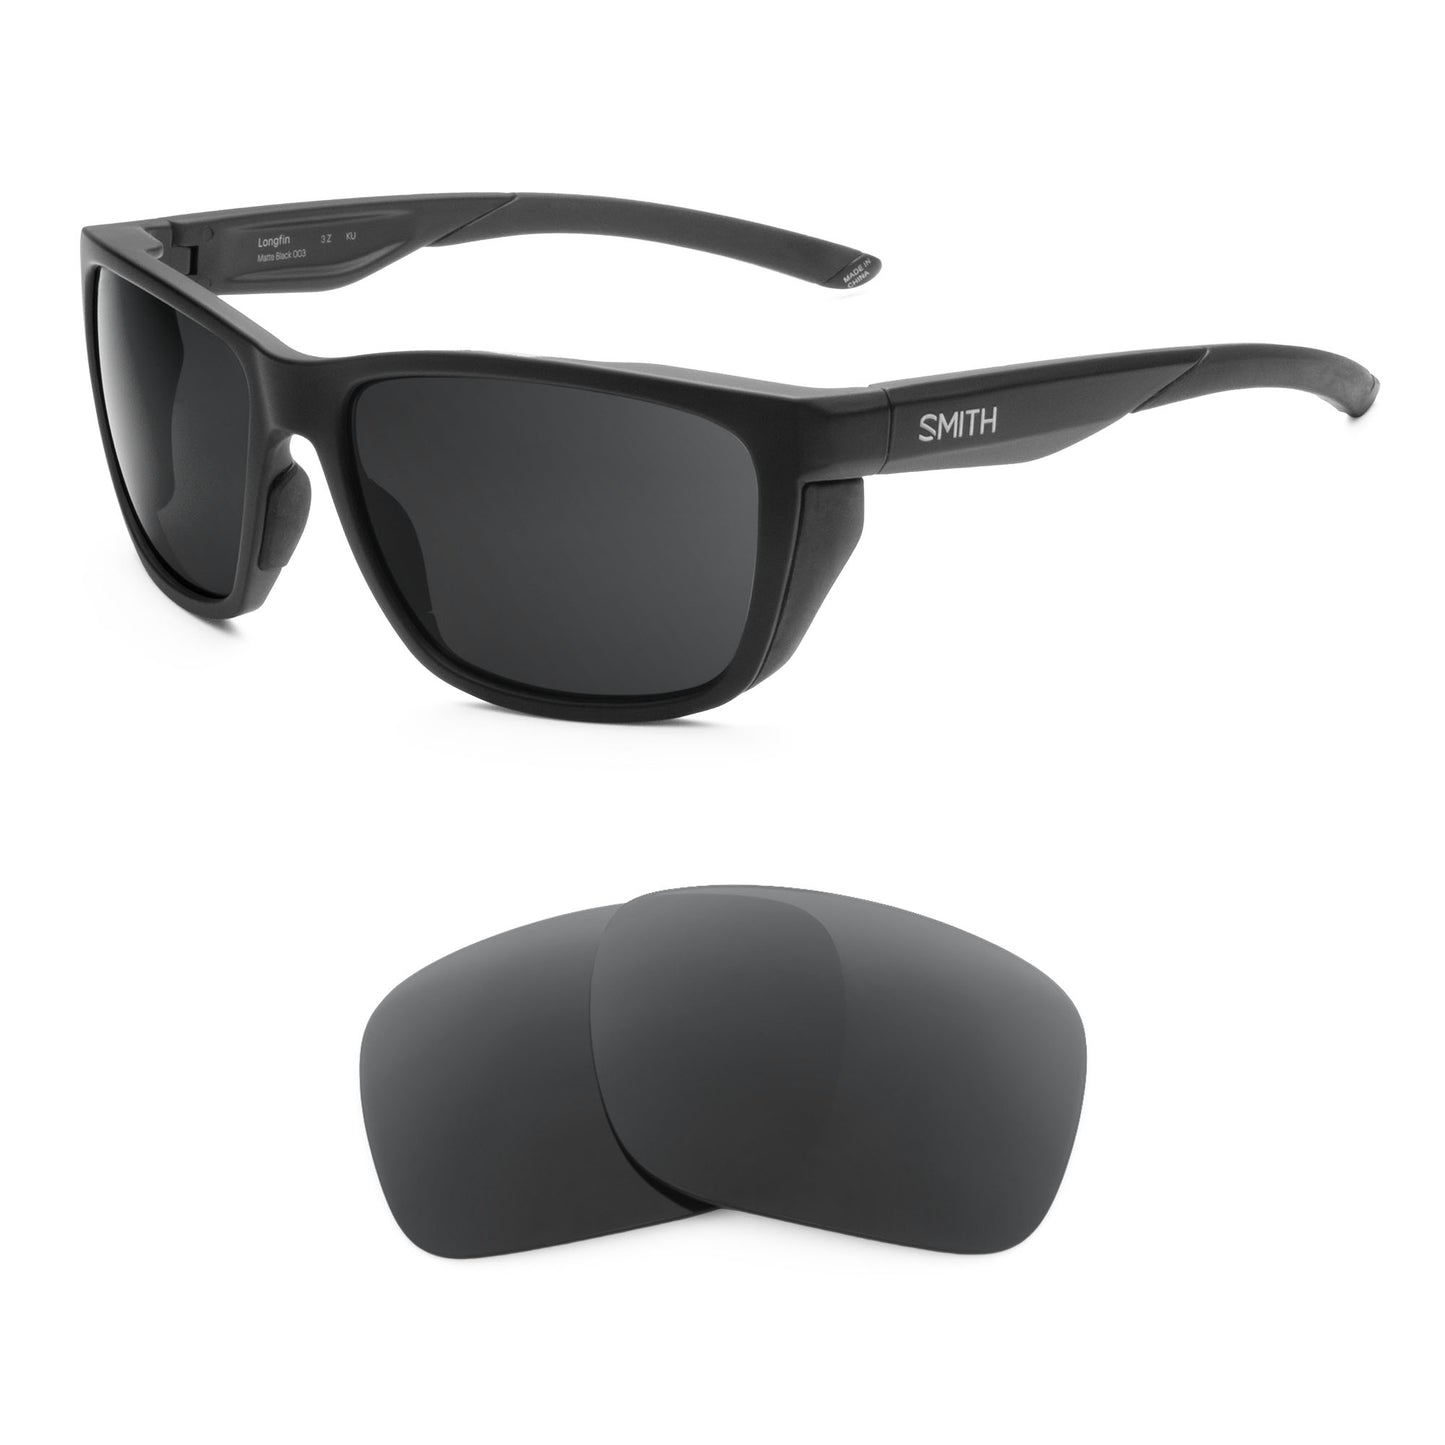 Smith Longfin sunglasses with replacement lenses